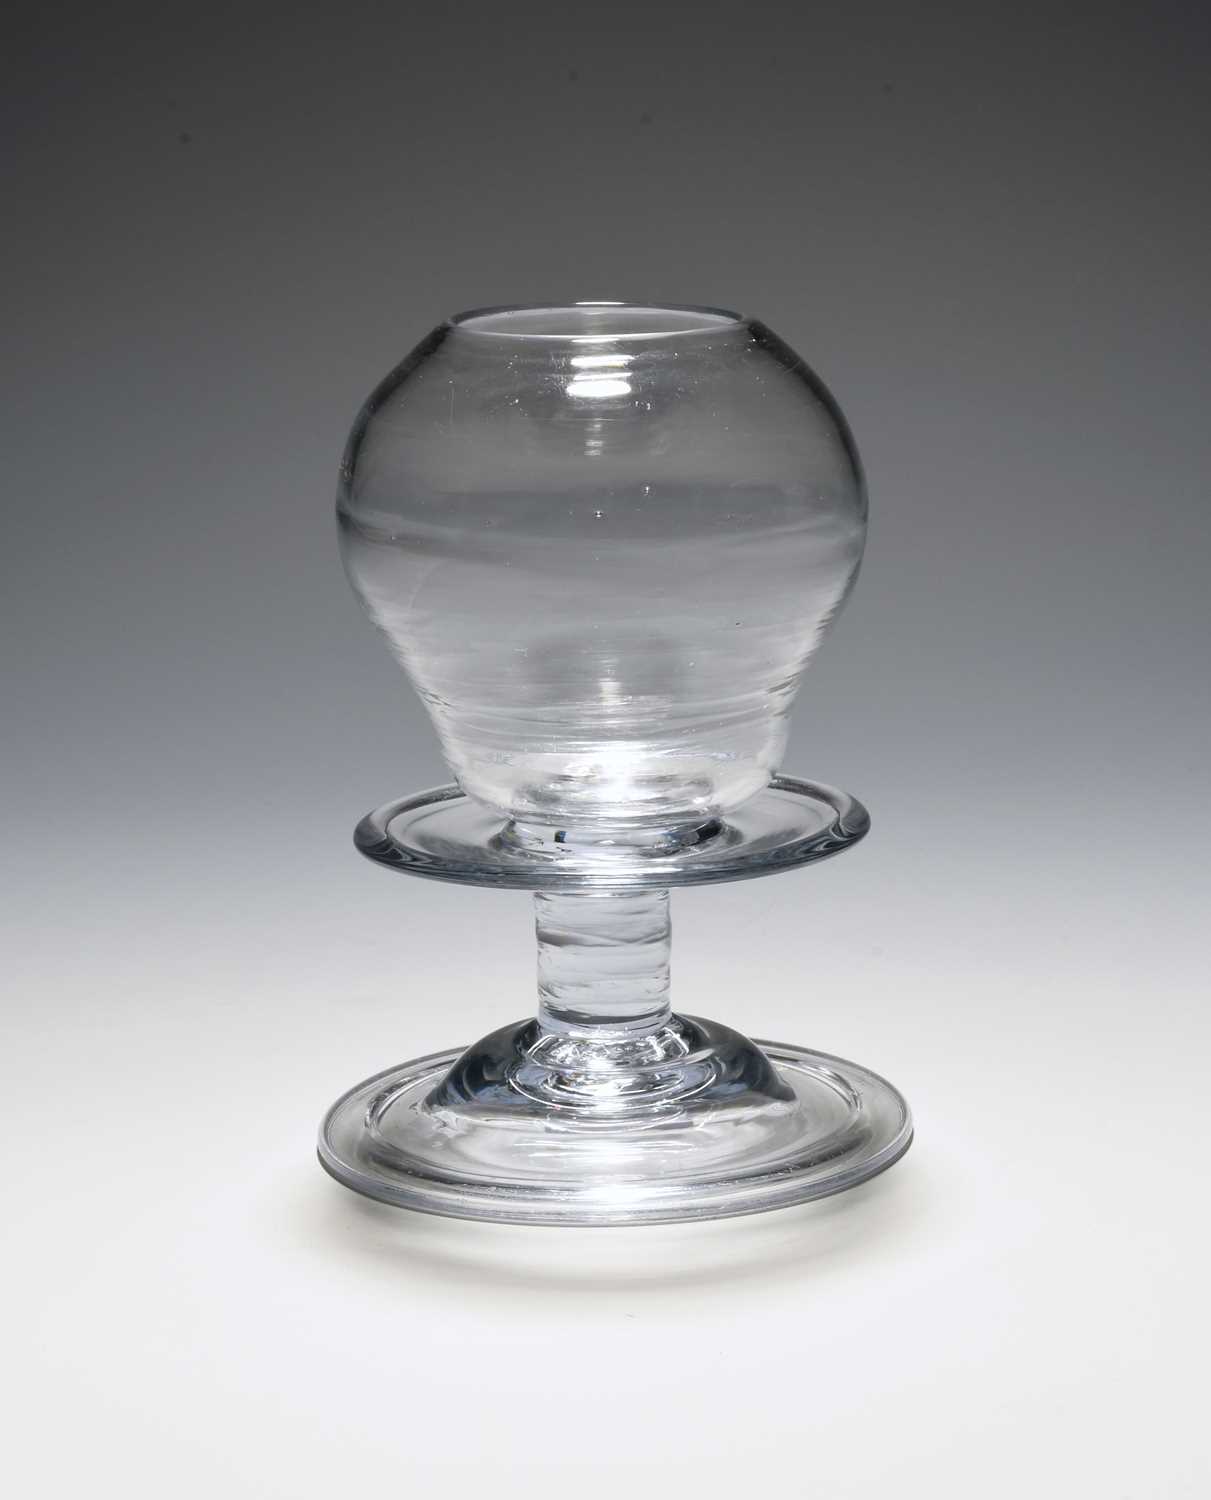 A glass lace-maker's lamp, mid 18th century, with an ogee shaped hollow lens over a wide collar,